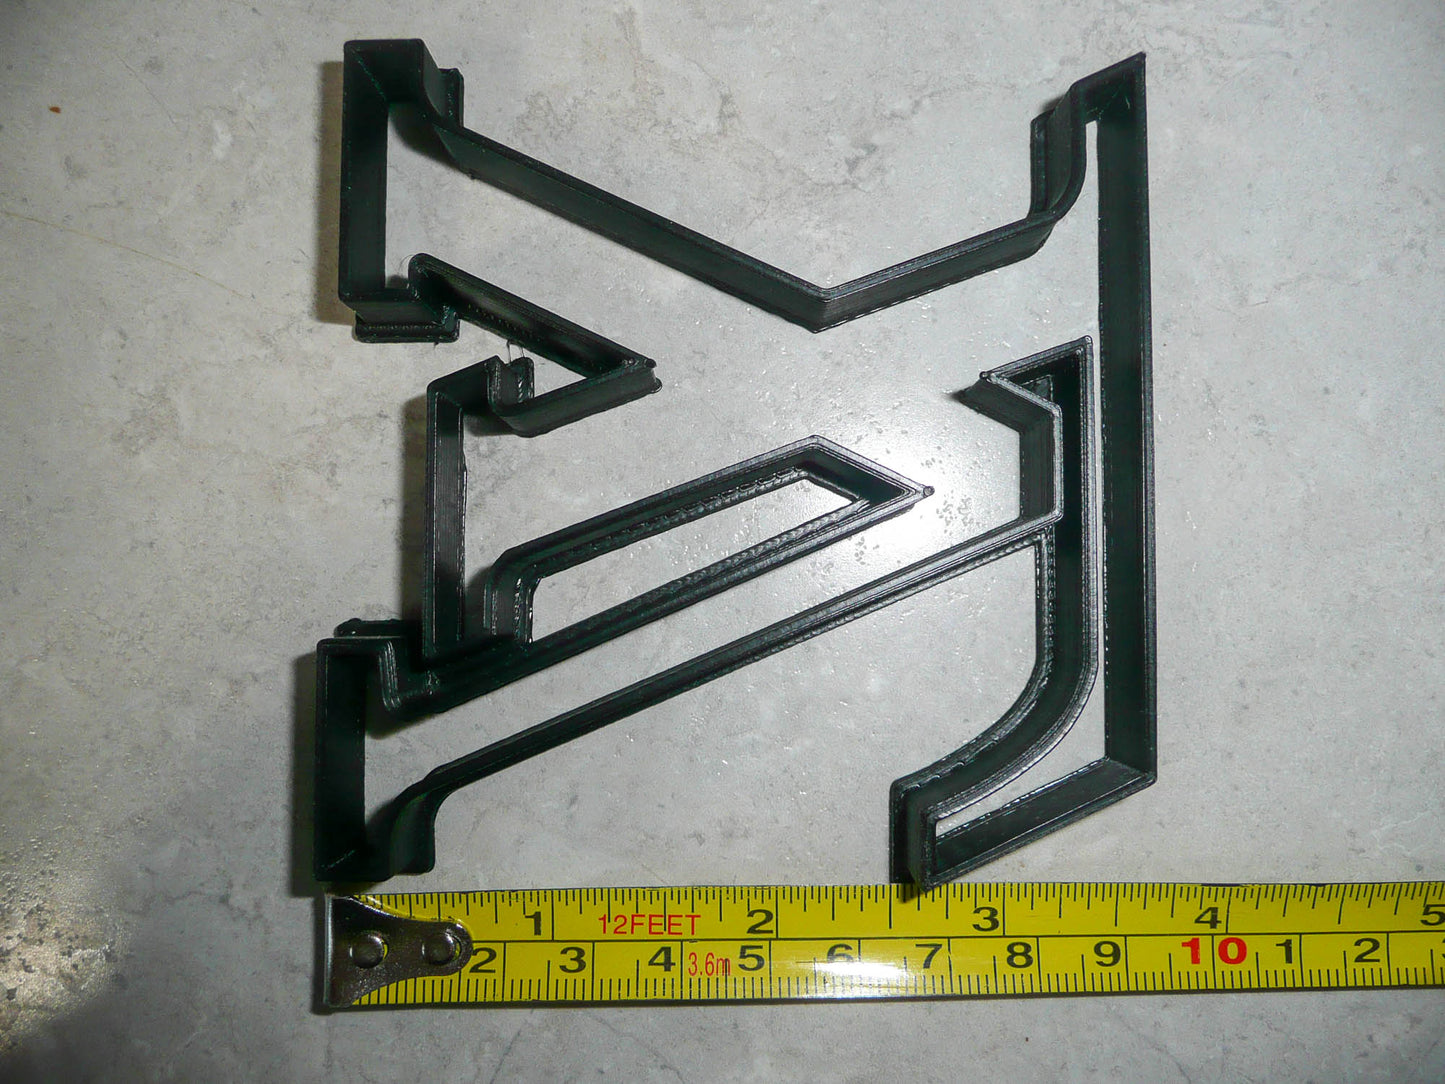 Cookie Cutters - Louis Vuitton logo plastic cookie cutter was sold for  R55.00 on 19 Feb at 16:02 by Lamay. in Johannesburg (ID:216804942)